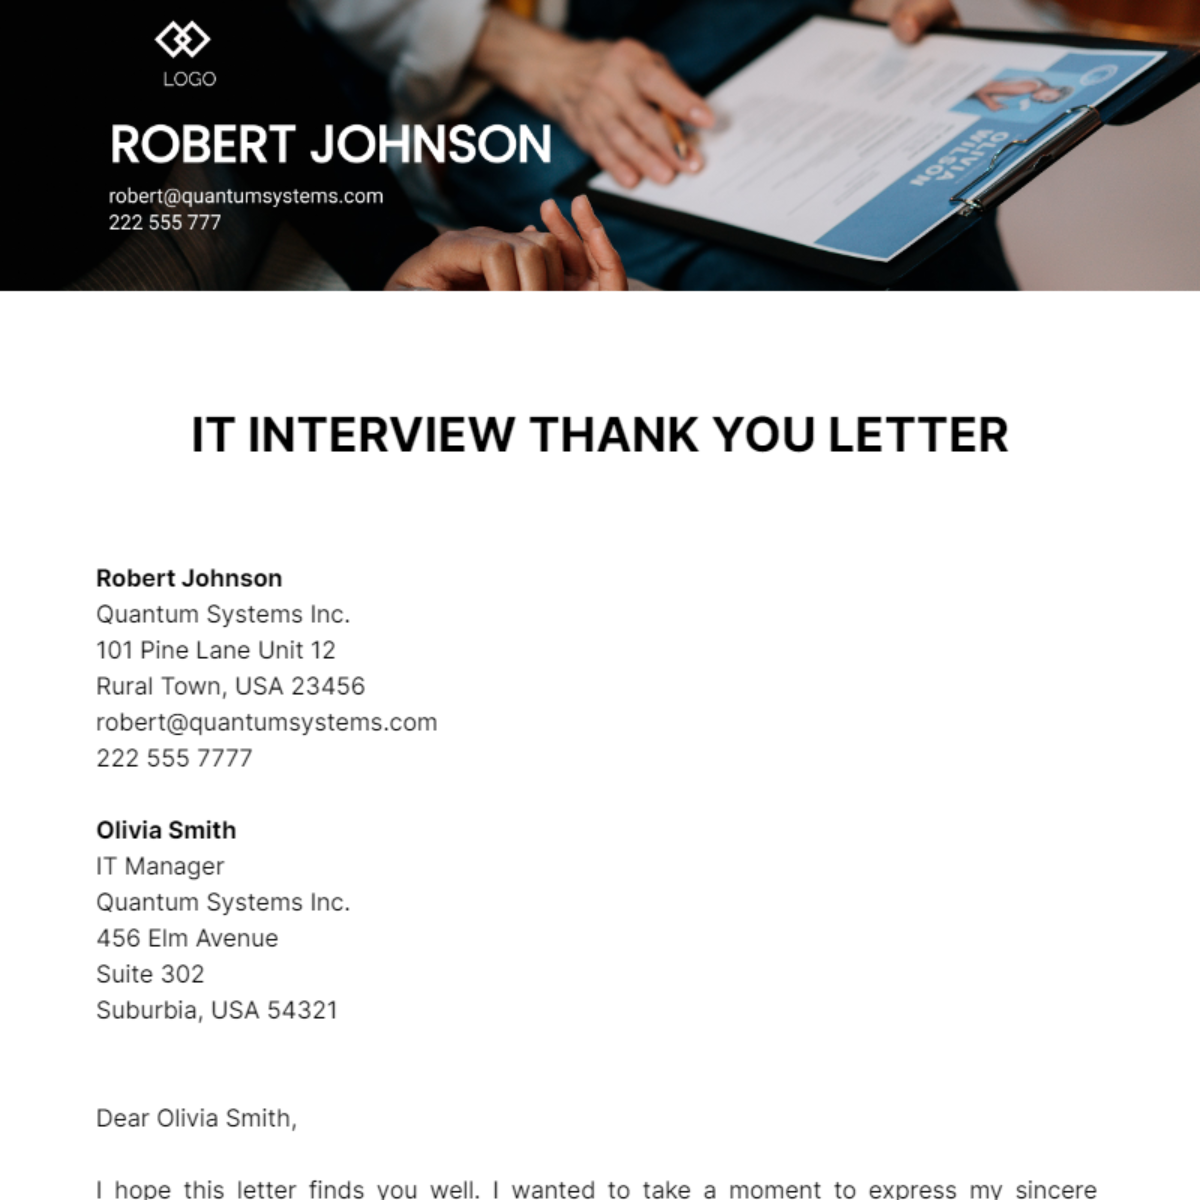 IT Interview Thank You Letter Template